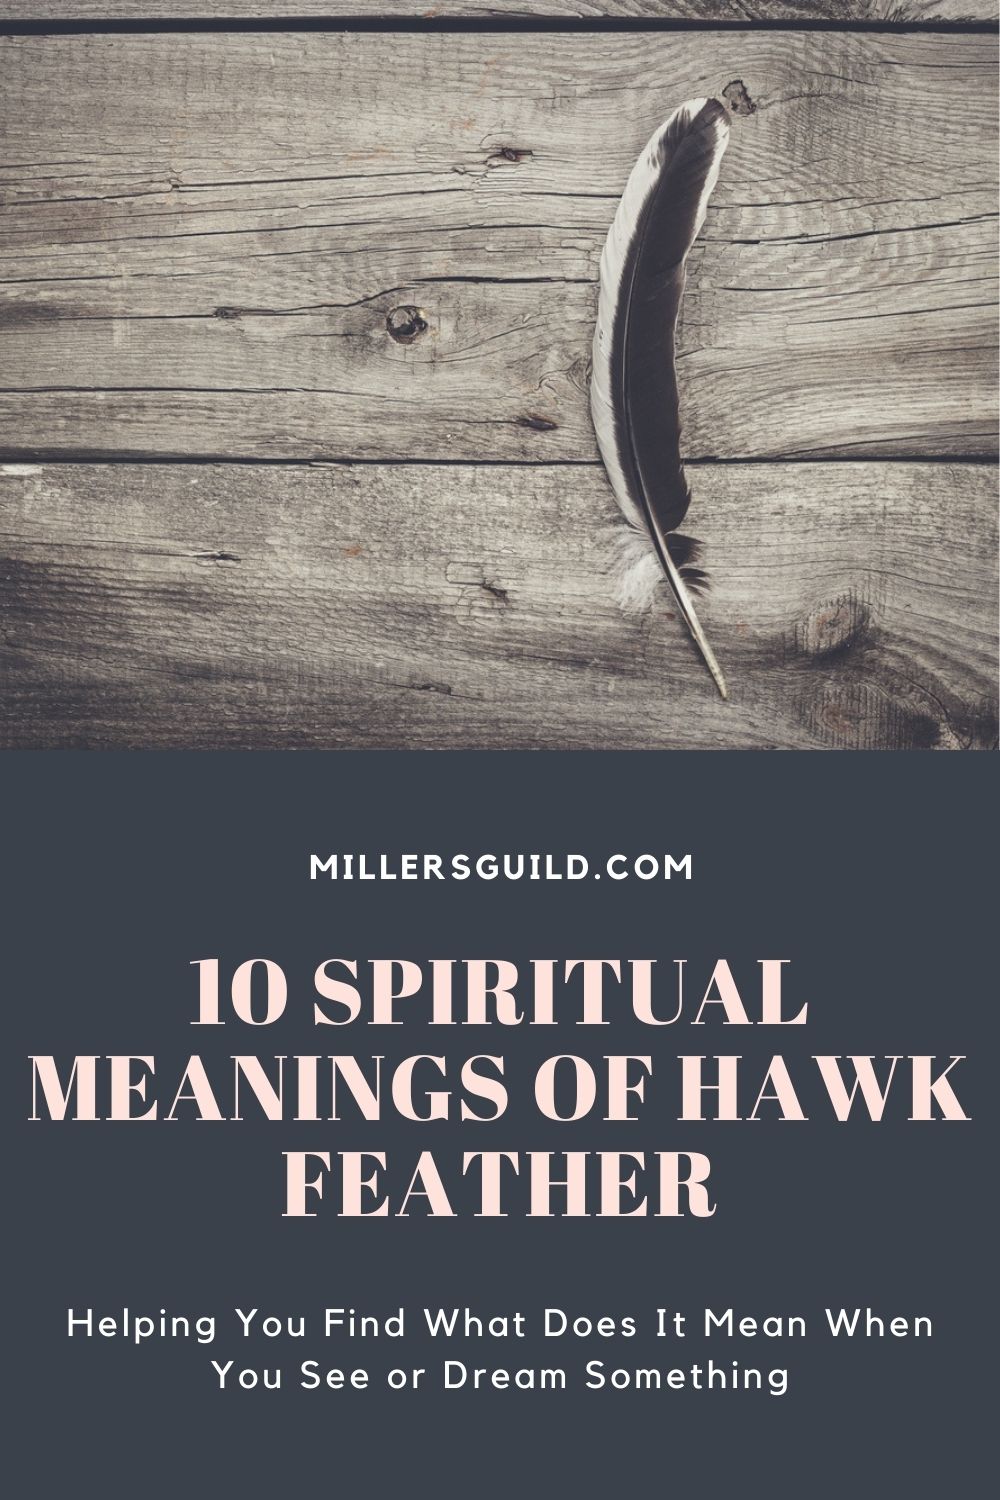 10 Spiritual Meanings of Hawk Feather 2